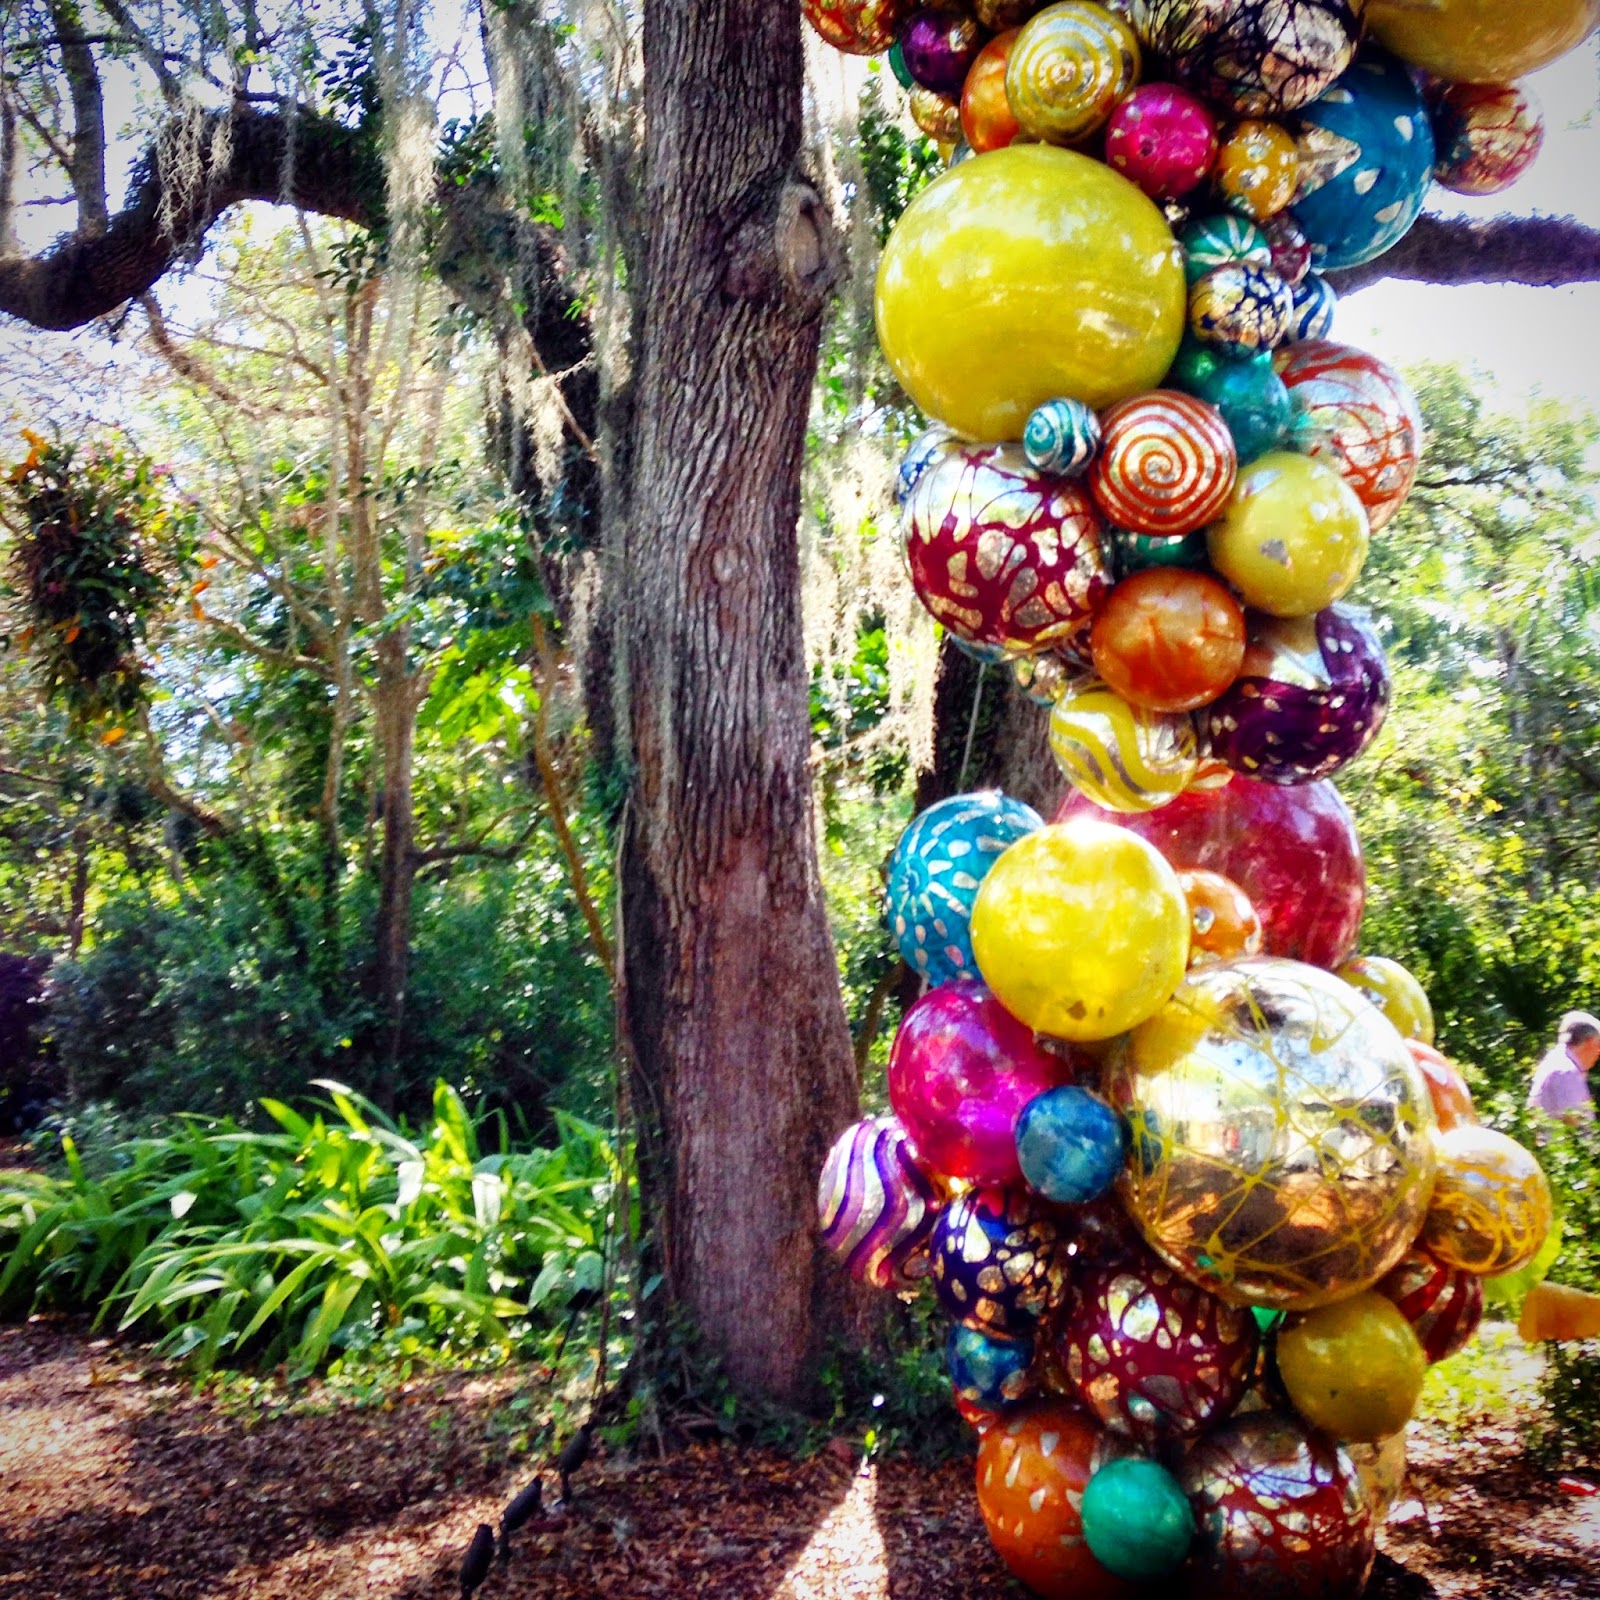 Read more about the article Chihuly at Fairchild Tropical Botanic Garden, Miami, Florida